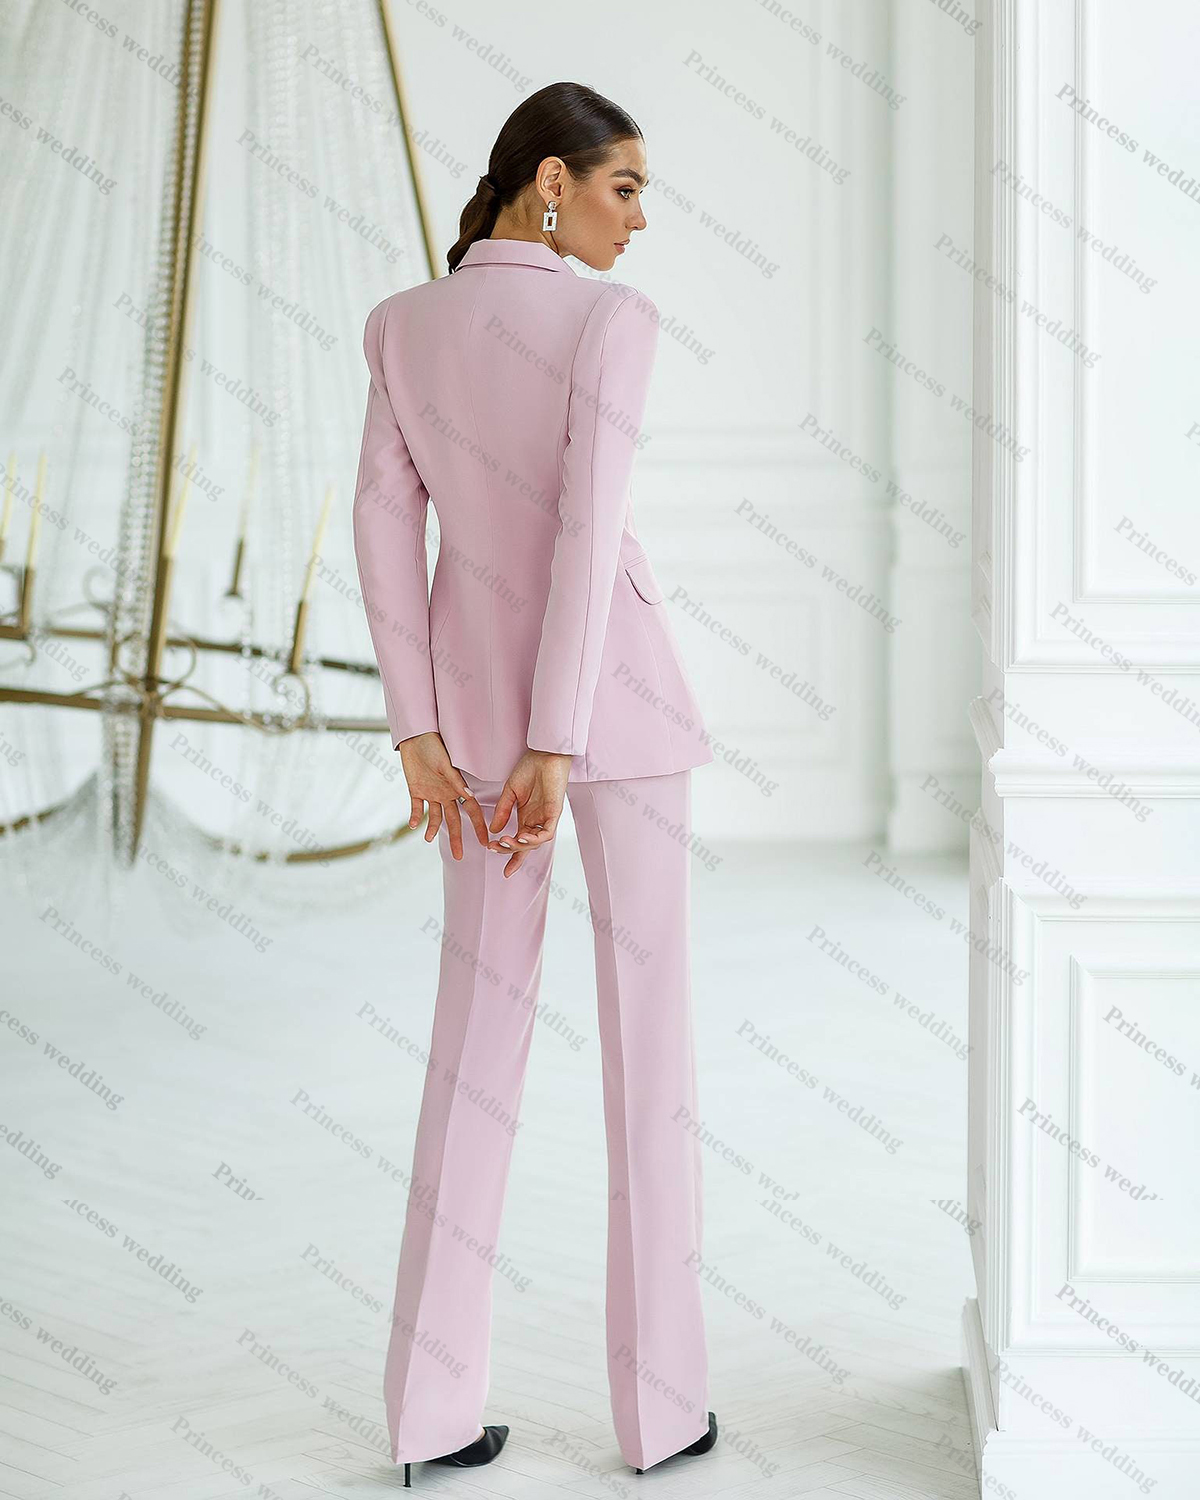 Luxury Pink Women Suits Blazer and Pants for Work Pantsuit for Wedding Party Business Custom Made